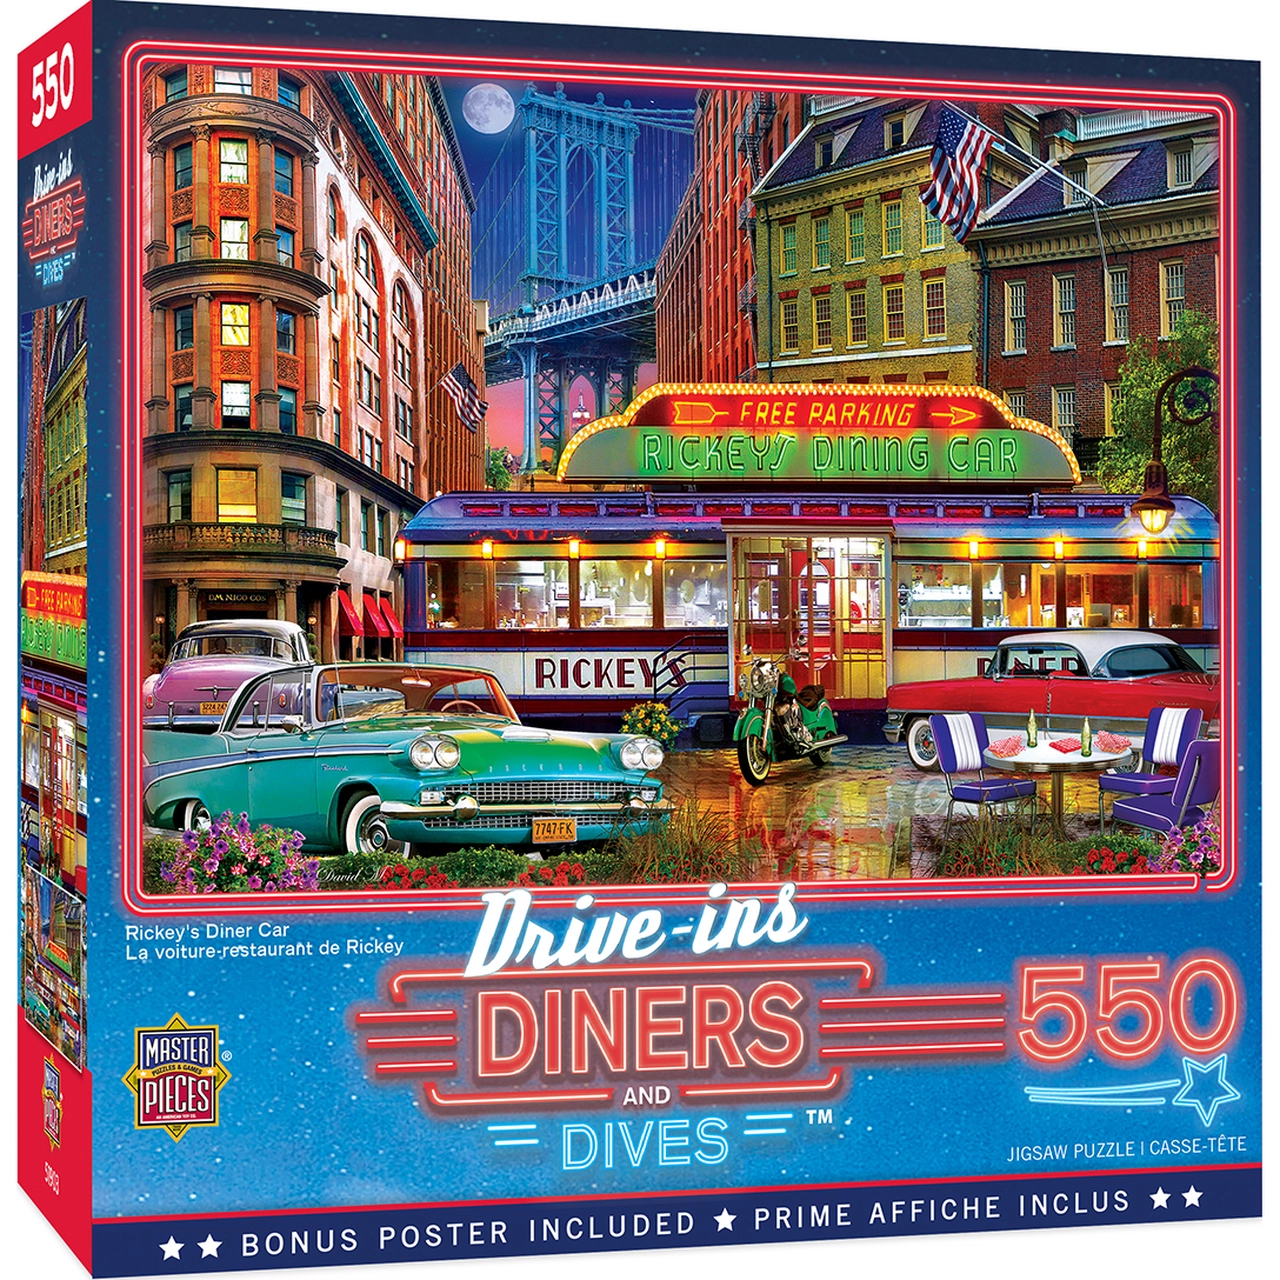 MasterPieces-Drive-Ins, Diners, and Dives - Ricky's Diner Car - 550 Piece Puzzle-32127-Legacy Toys